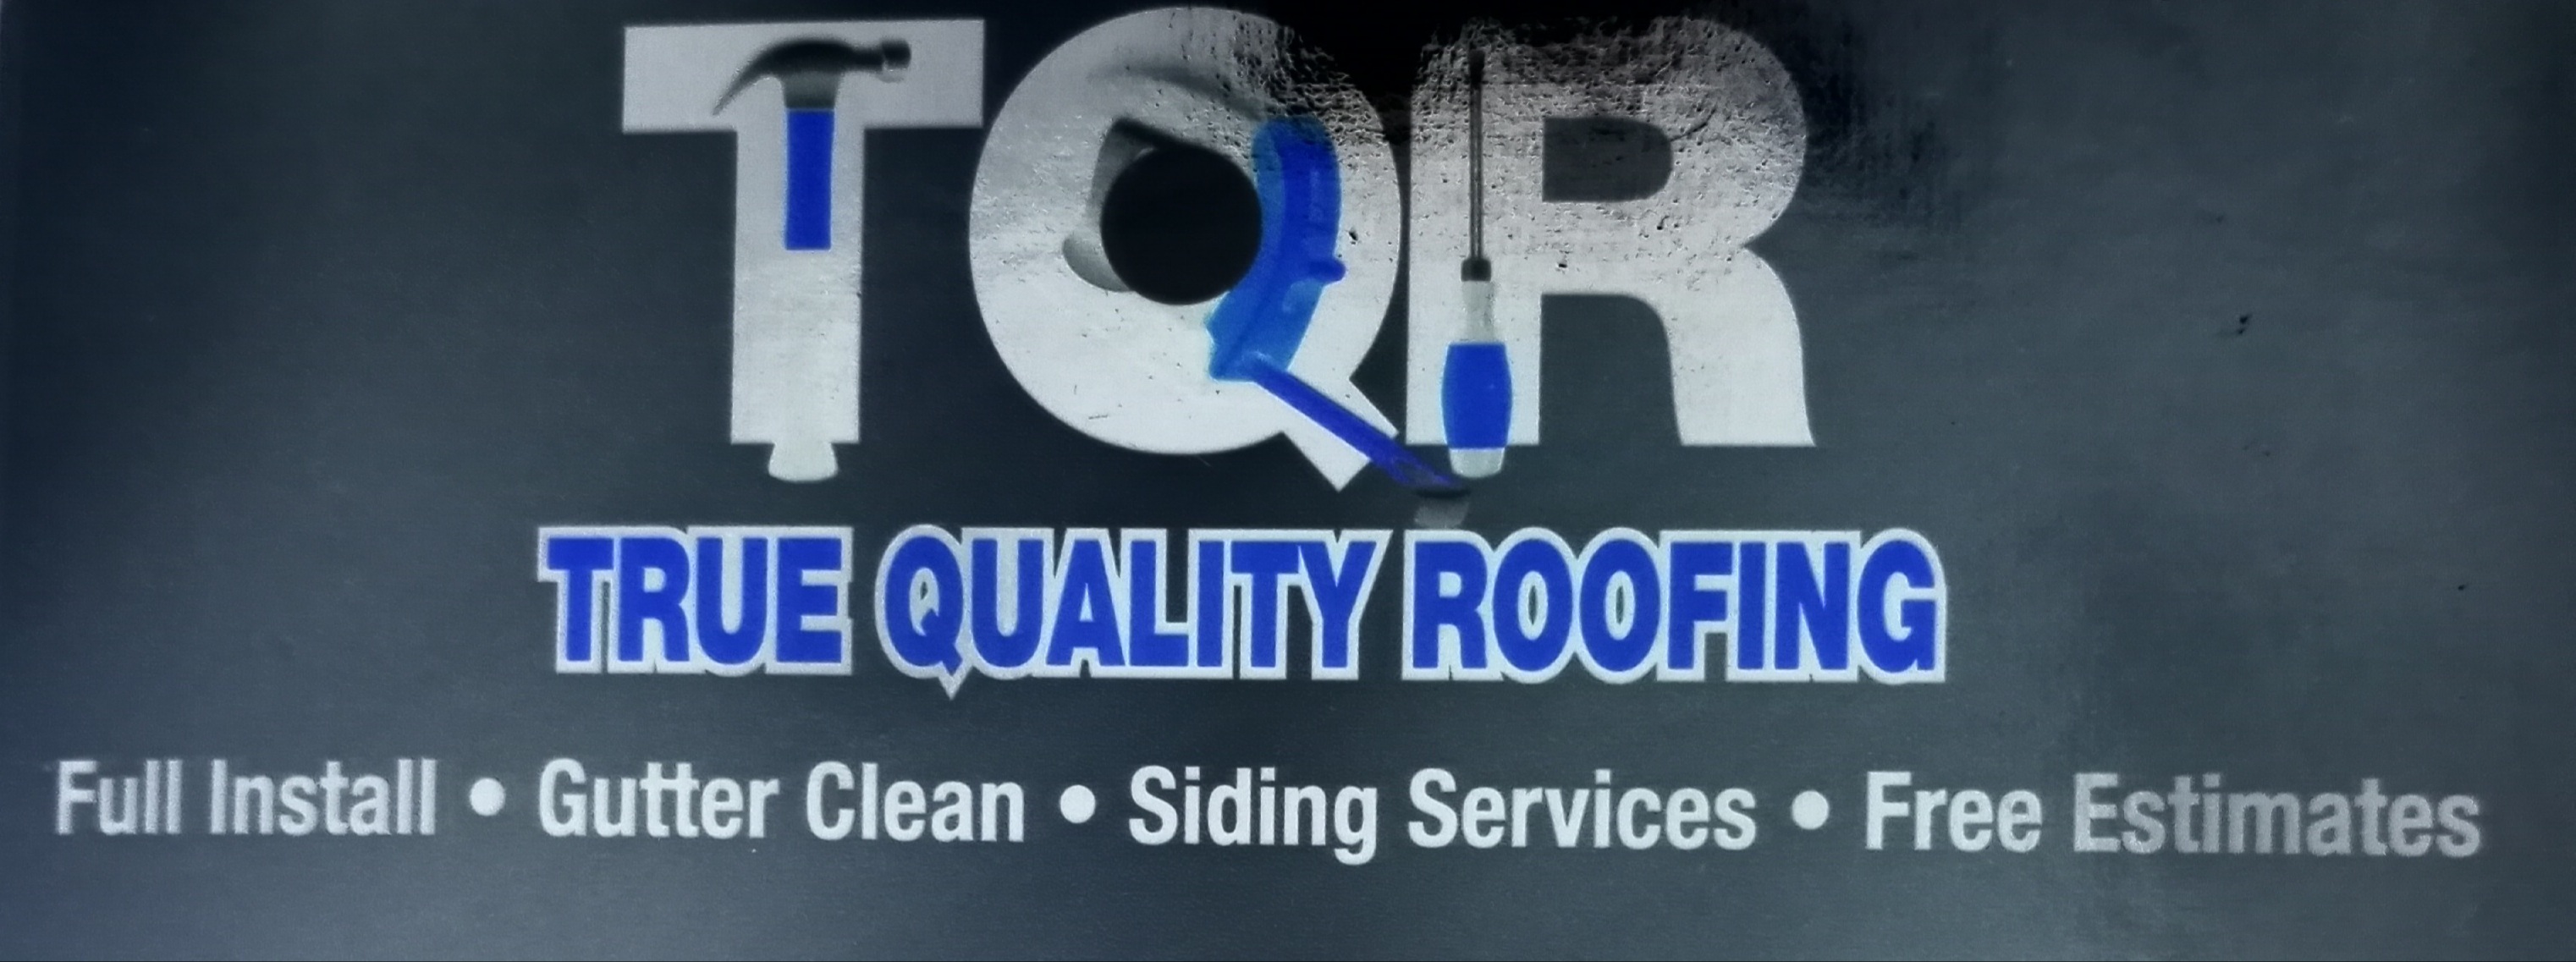 True Quality Roofing Logo